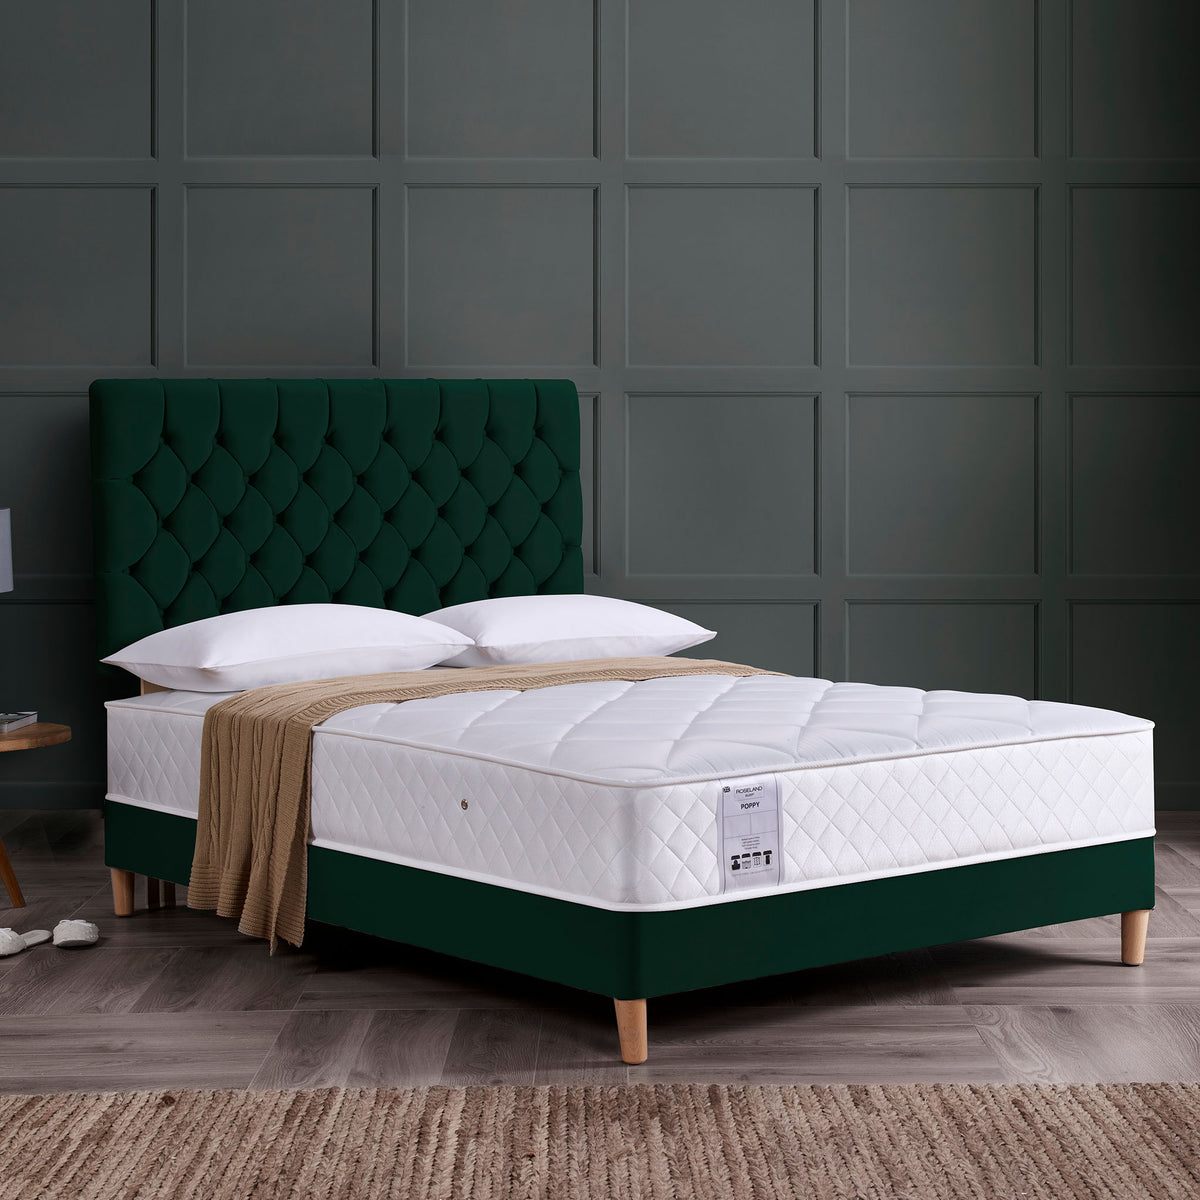 Poppy Quilted Mattress by Roseland Sleep lifestyle image